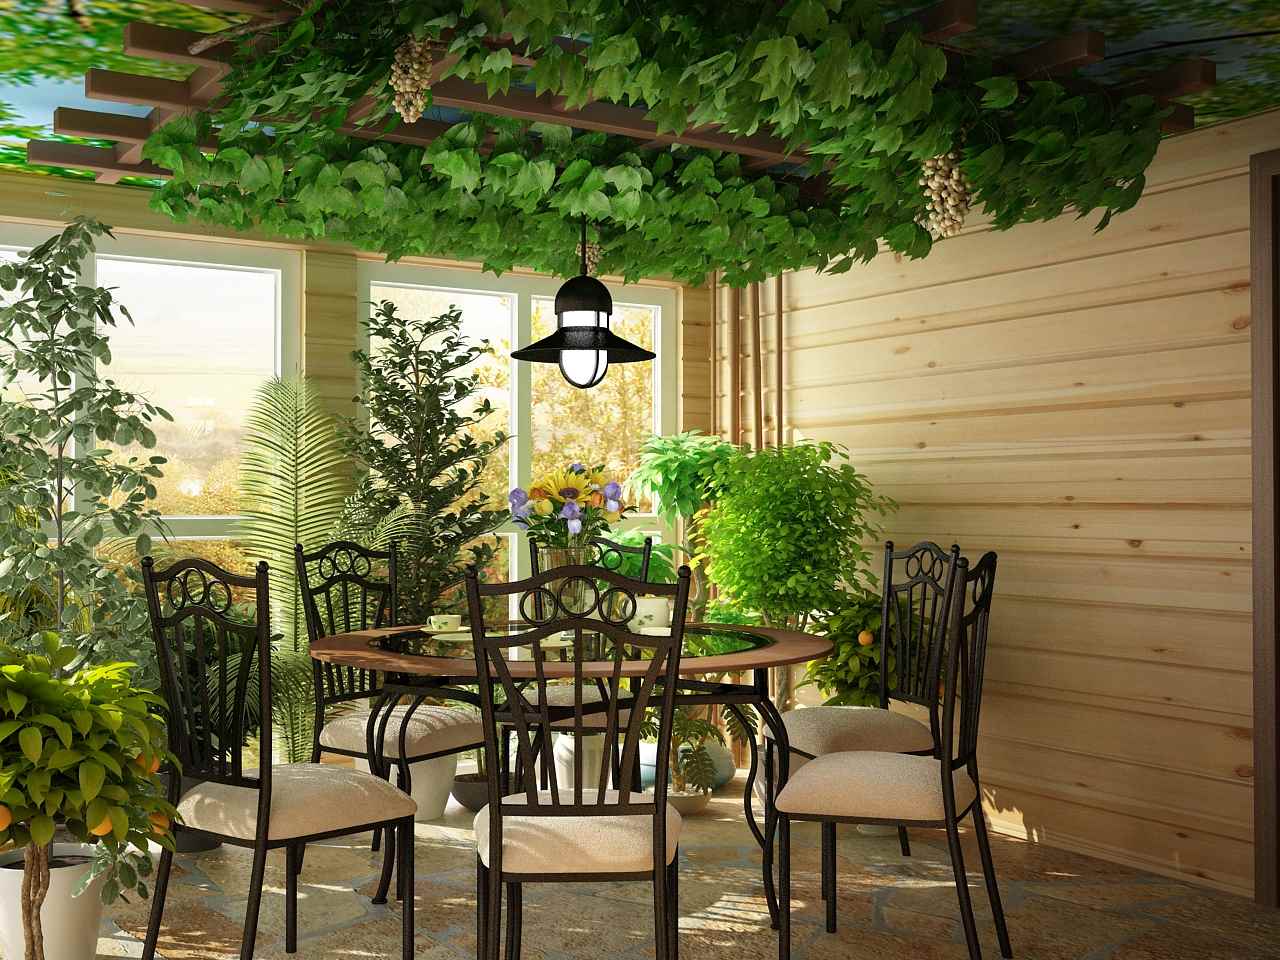 the idea of ​​using bright ideas for decorating a winter garden in a house